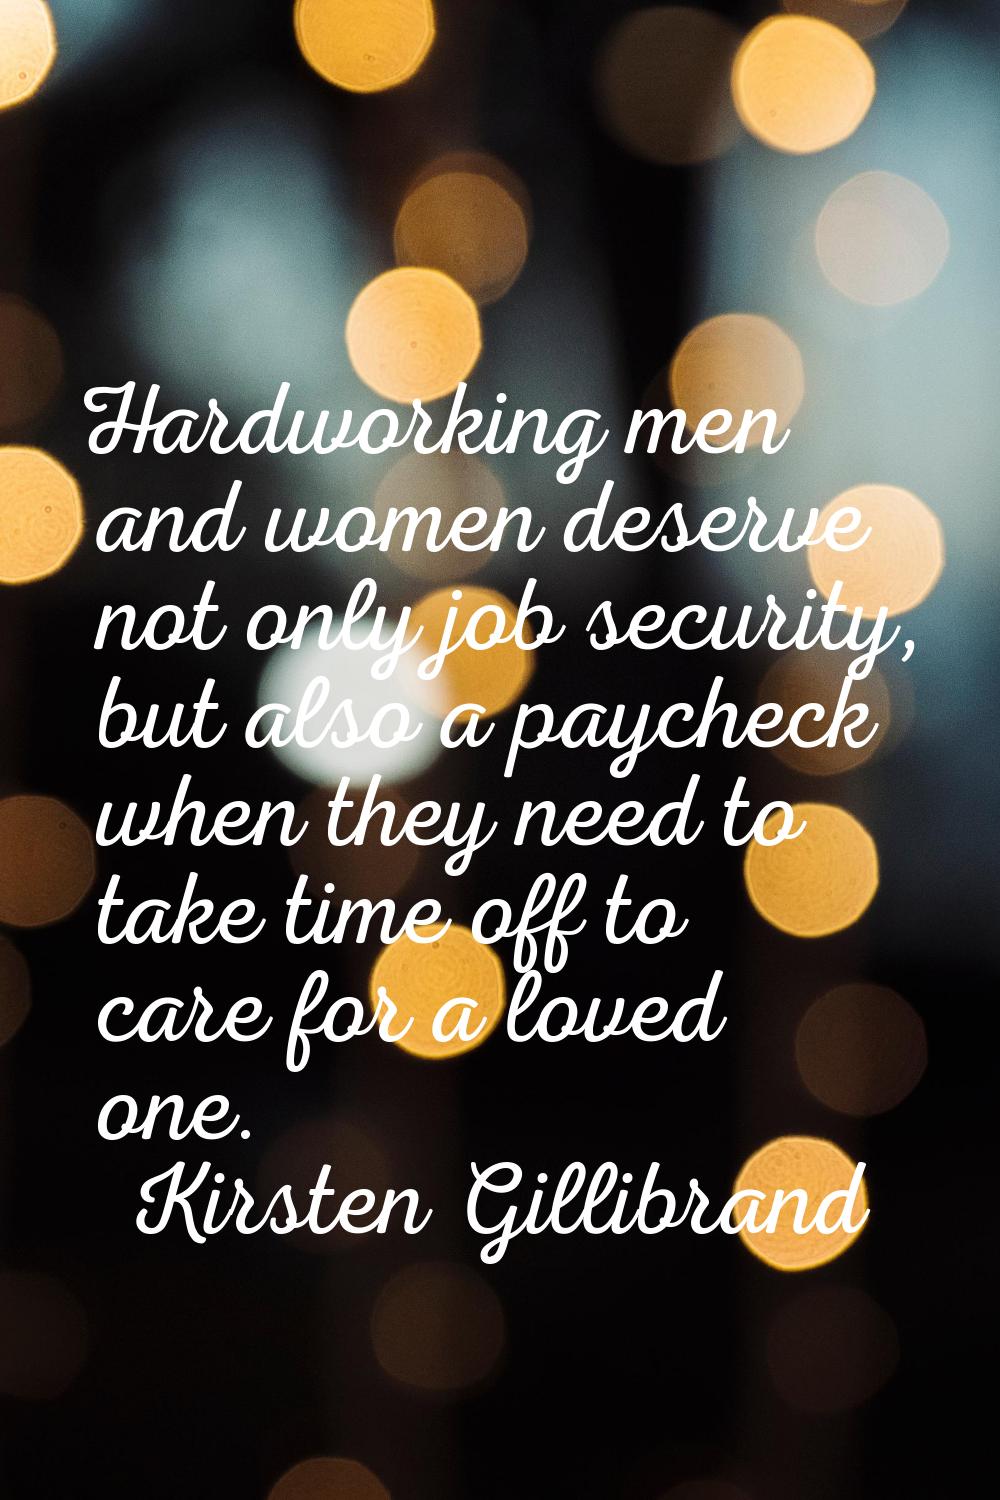 Hardworking men and women deserve not only job security, but also a paycheck when they need to take